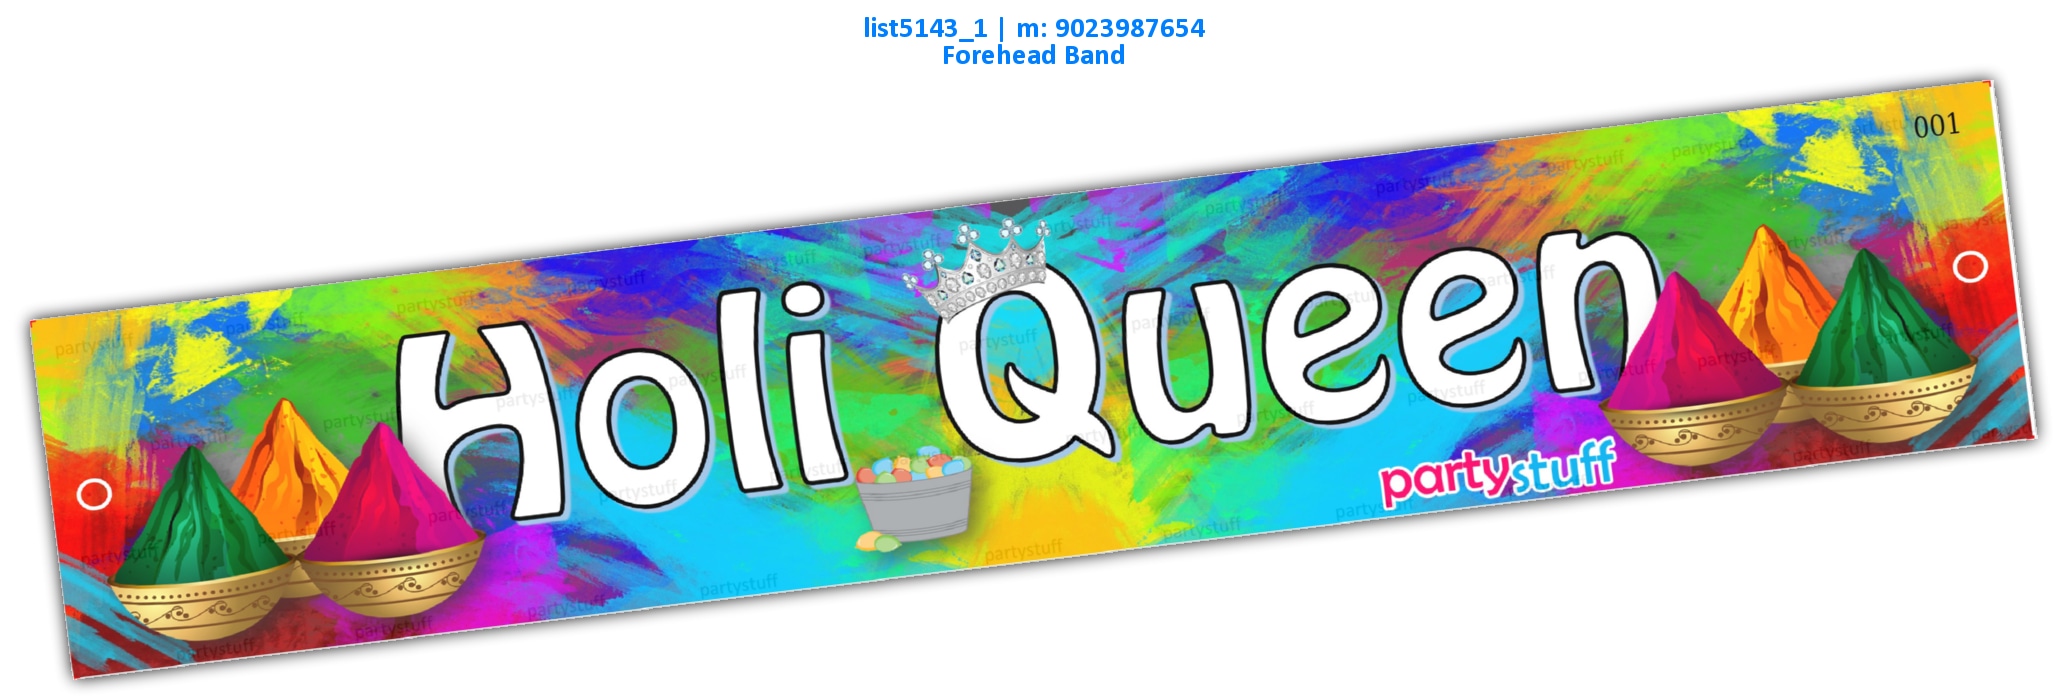 Holi Queen Forehead band 2 | Printed list5143_1 Printed Accessory